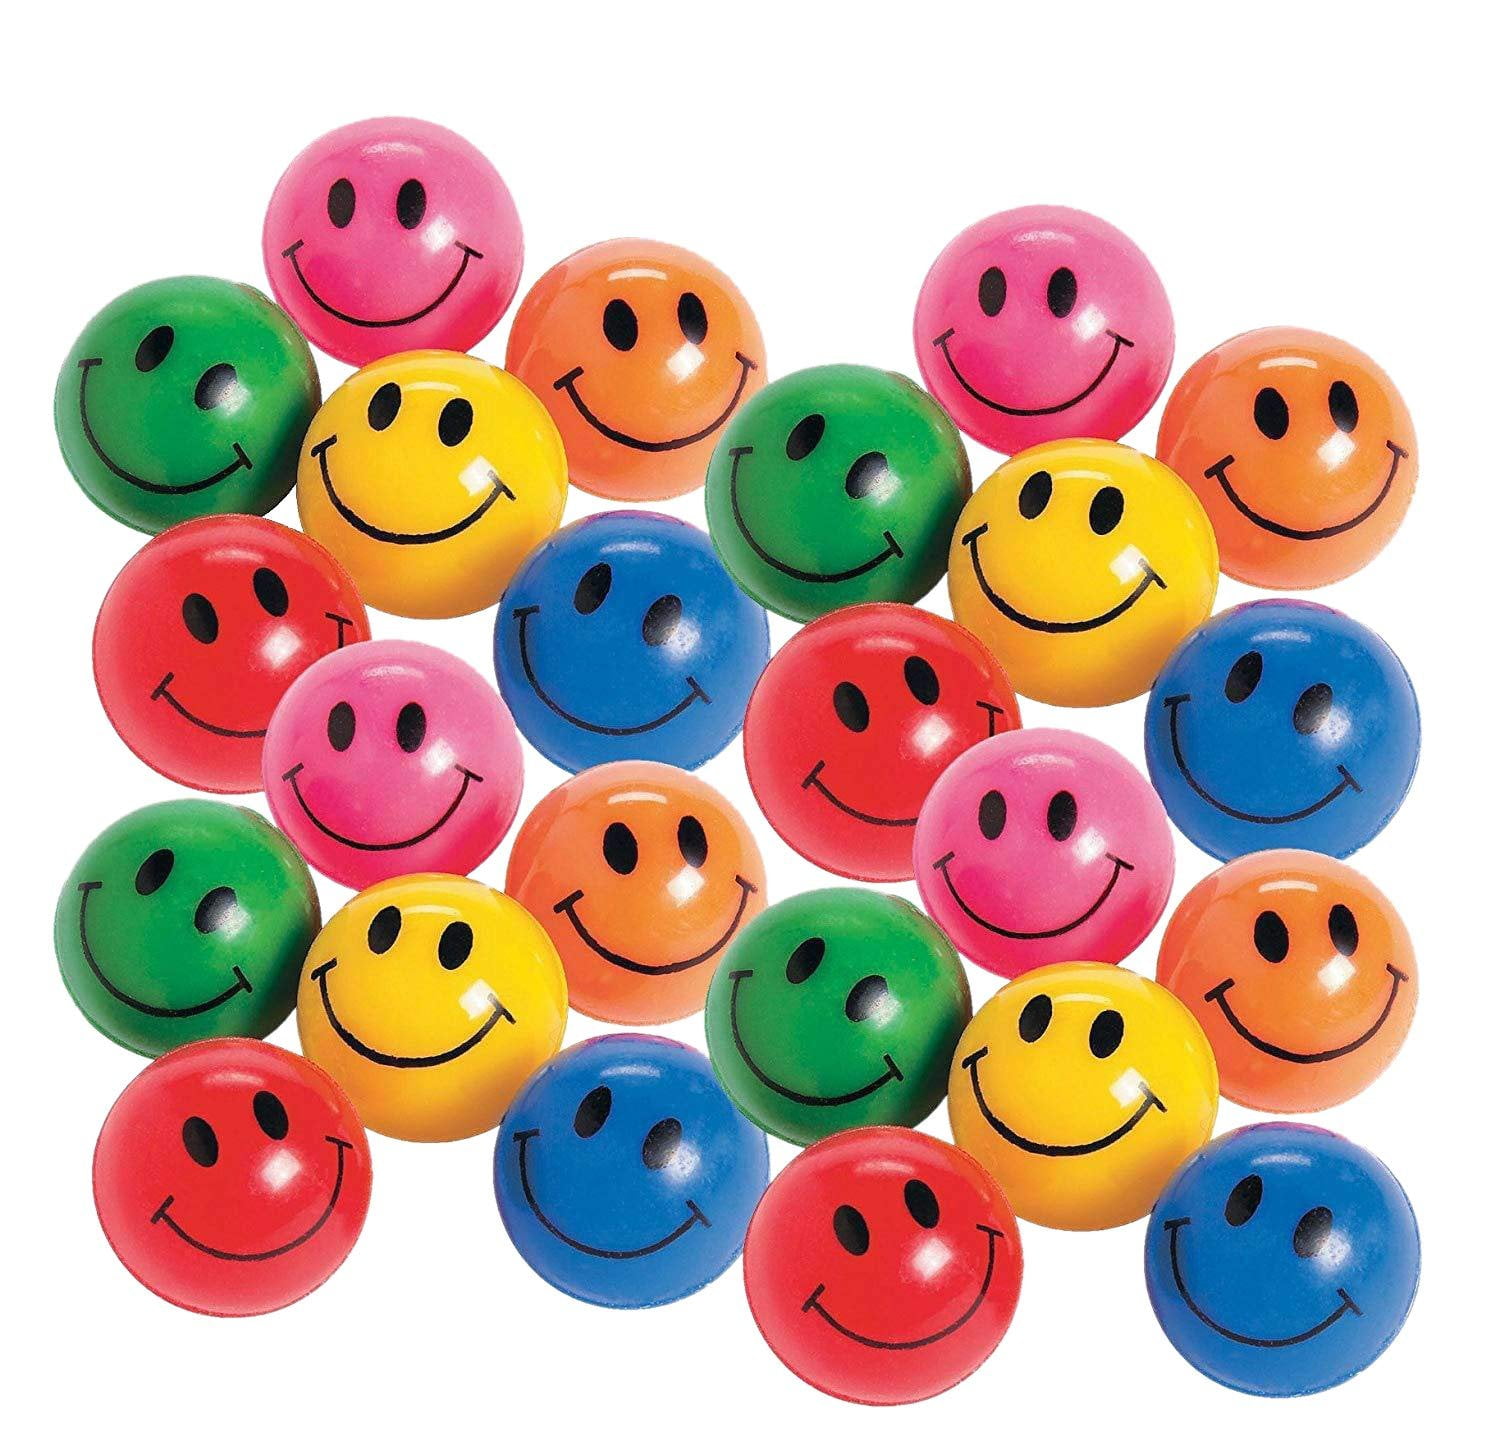 5 x EMOJI SMILEY FACE FINGER PUPPETS BOY GIRL TOY LOOT BIRTHDAY PARTY BAG FILLER 